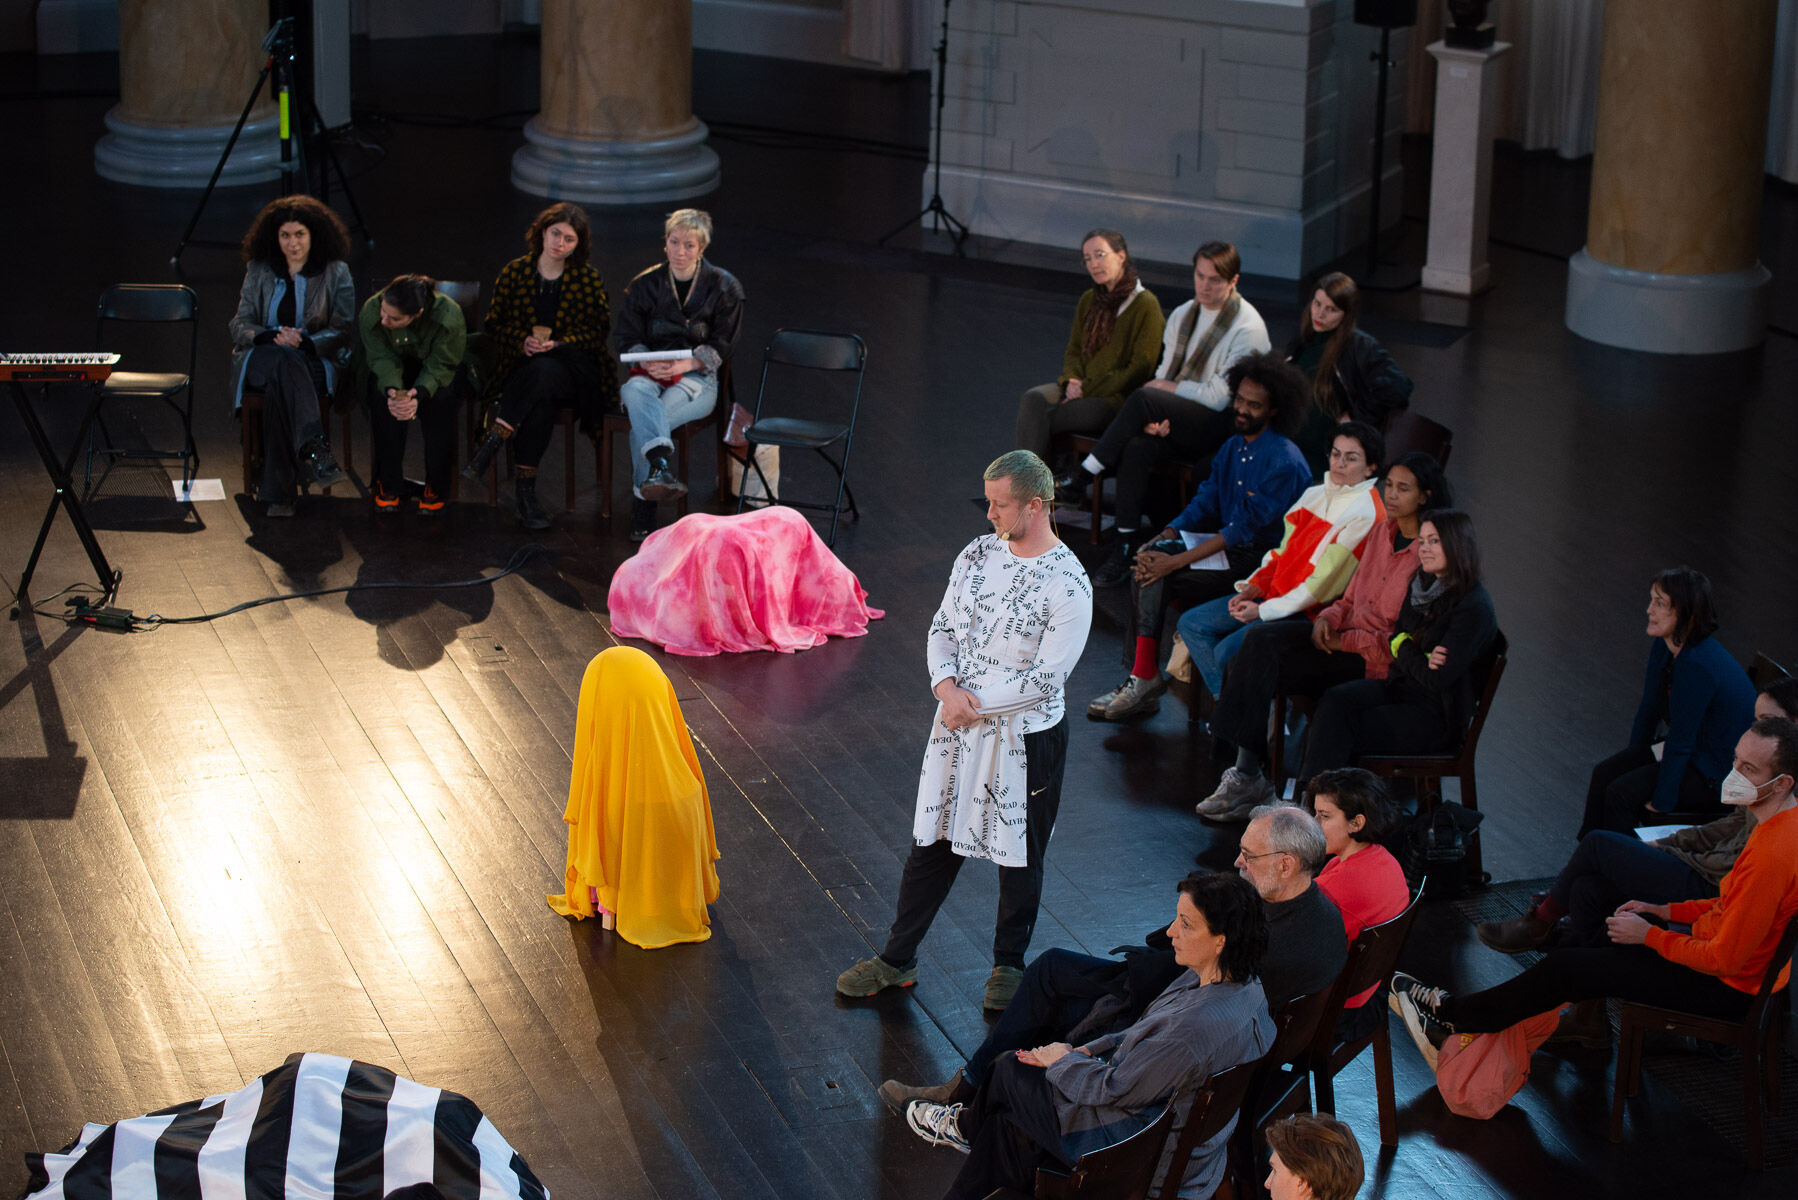 A circle of audience members surrounds three performers. One is shrouded in a gold-colored fabric, and another in a pink tie-dyed fabric, with both crouched on the black wooden floor. The third performer, with blue hair and a patterned black-and-white top, stands and looks to their right. 